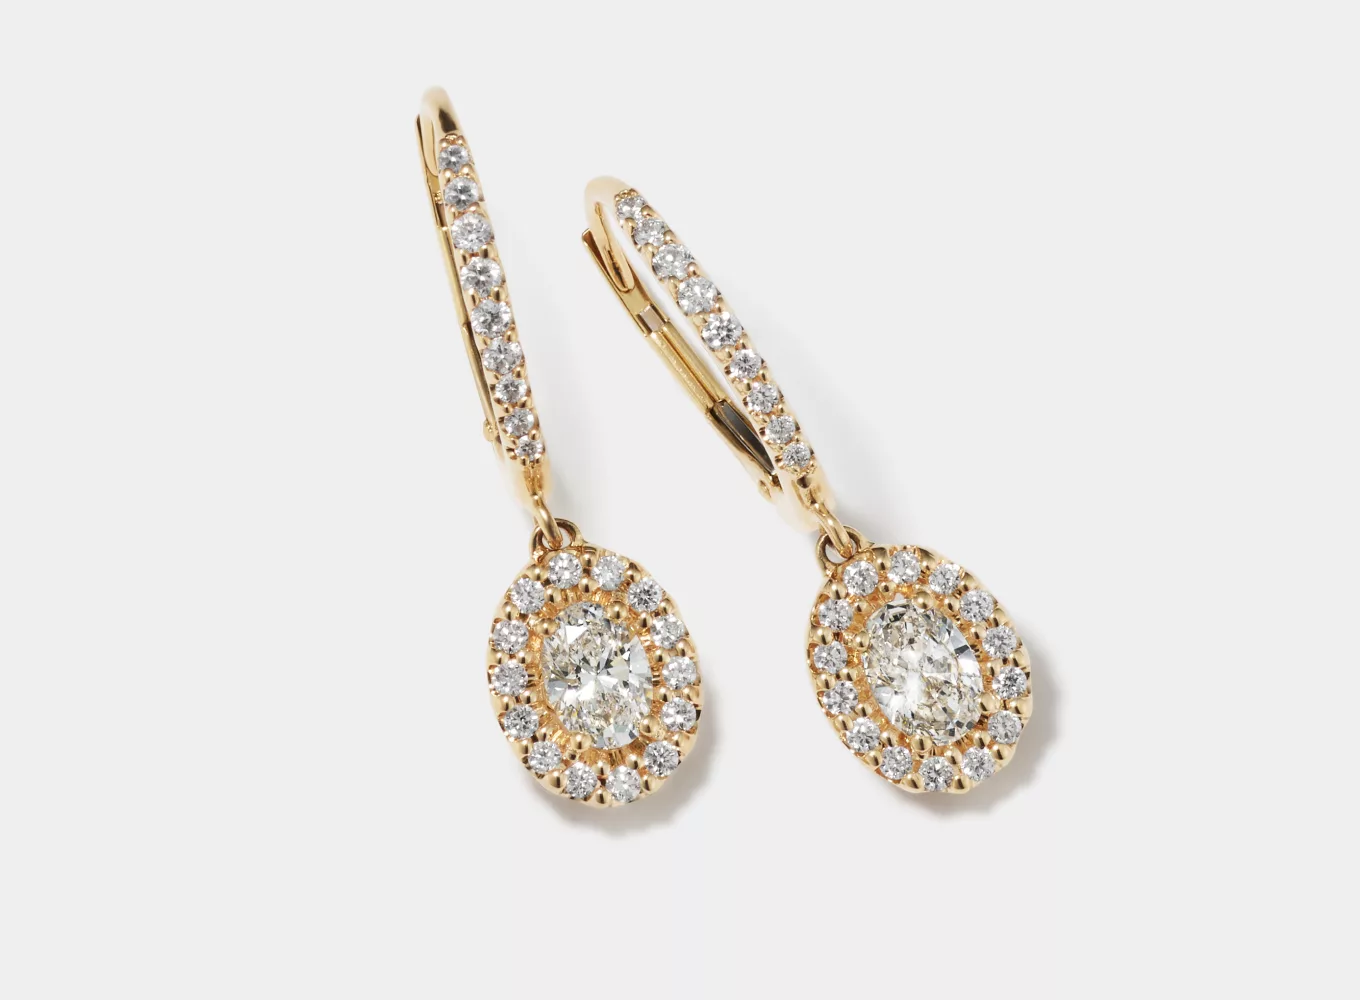 Oval 1 tcw Lab-Grown Diamond Halo Earrings. 48 round and oval lab-grown diamonds at 1 tcw, Dangle design, Approx. 1-inch length, Lever back, 14k yellow gold